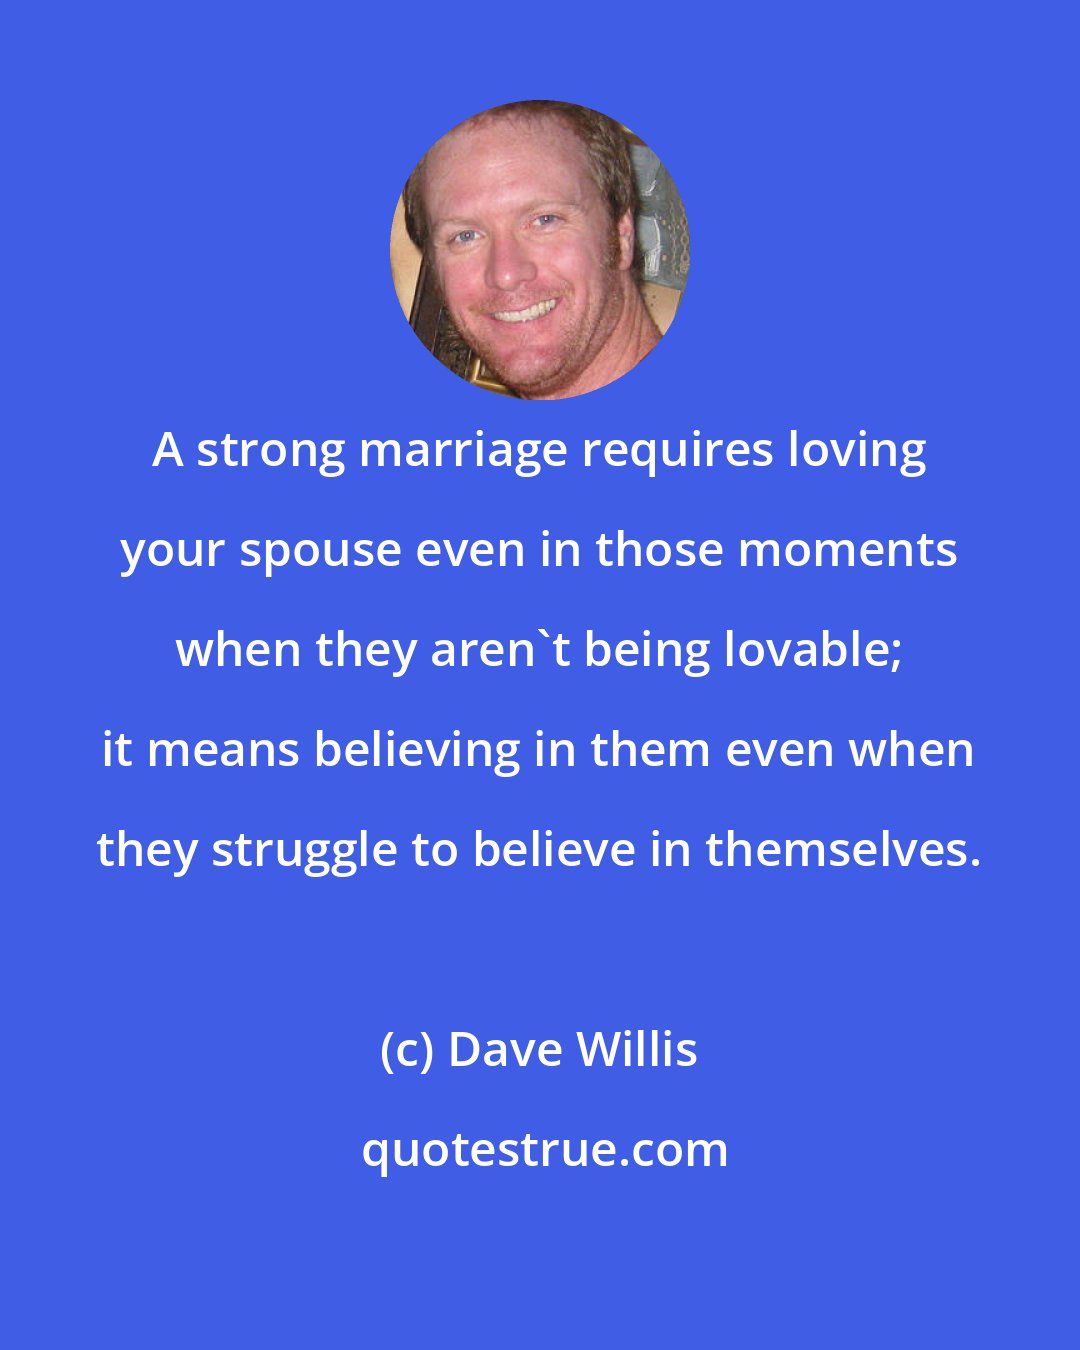 Dave Willis: A strong marriage requires loving your spouse even in those moments when they aren't being lovable; it means believing in them even when they struggle to believe in themselves.